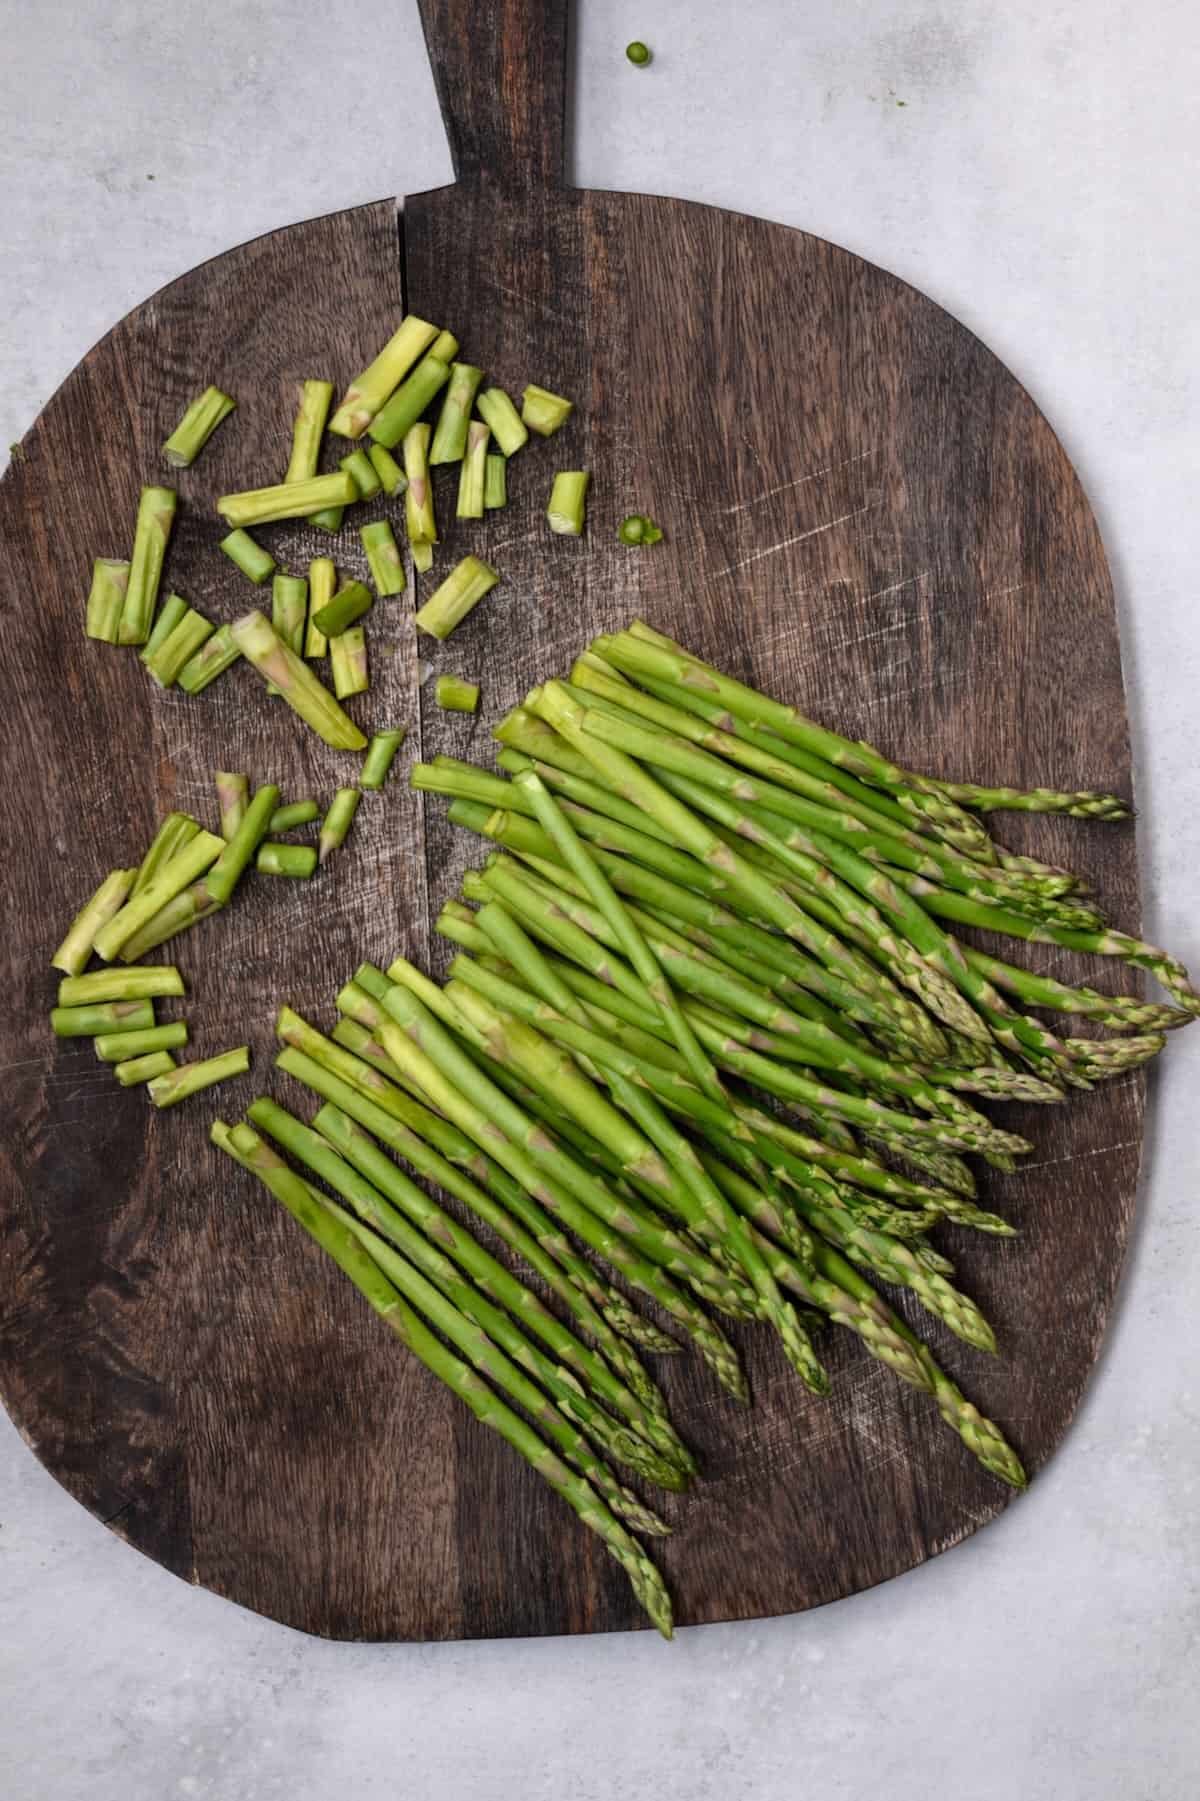 Trimmed asparagus on a chopping board